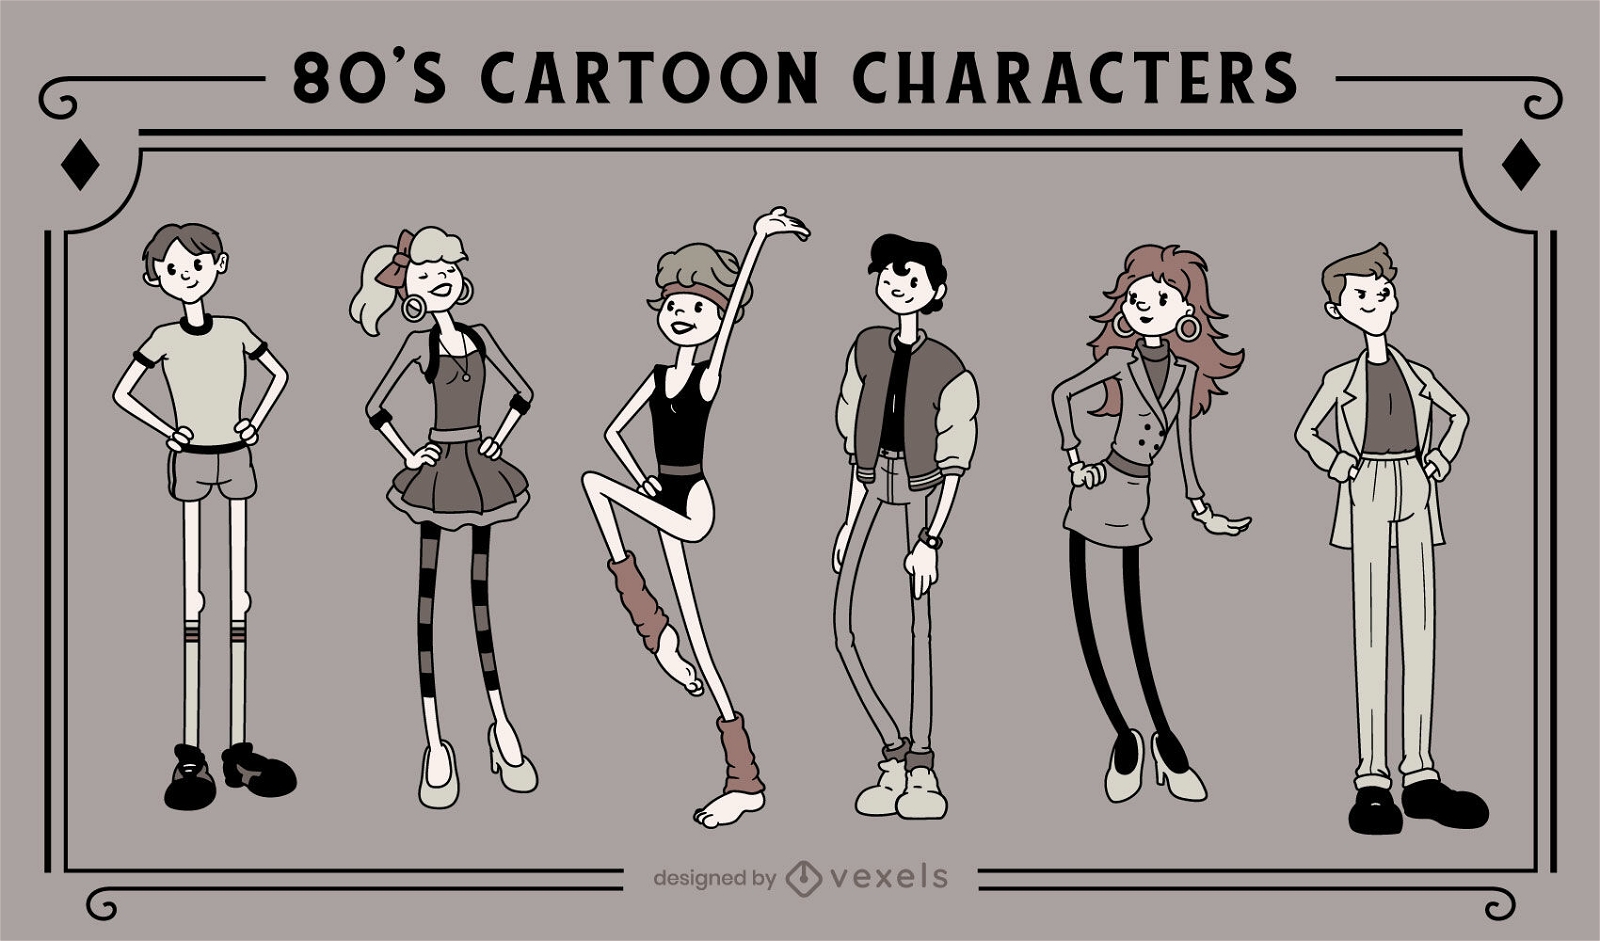 characters from the 80s